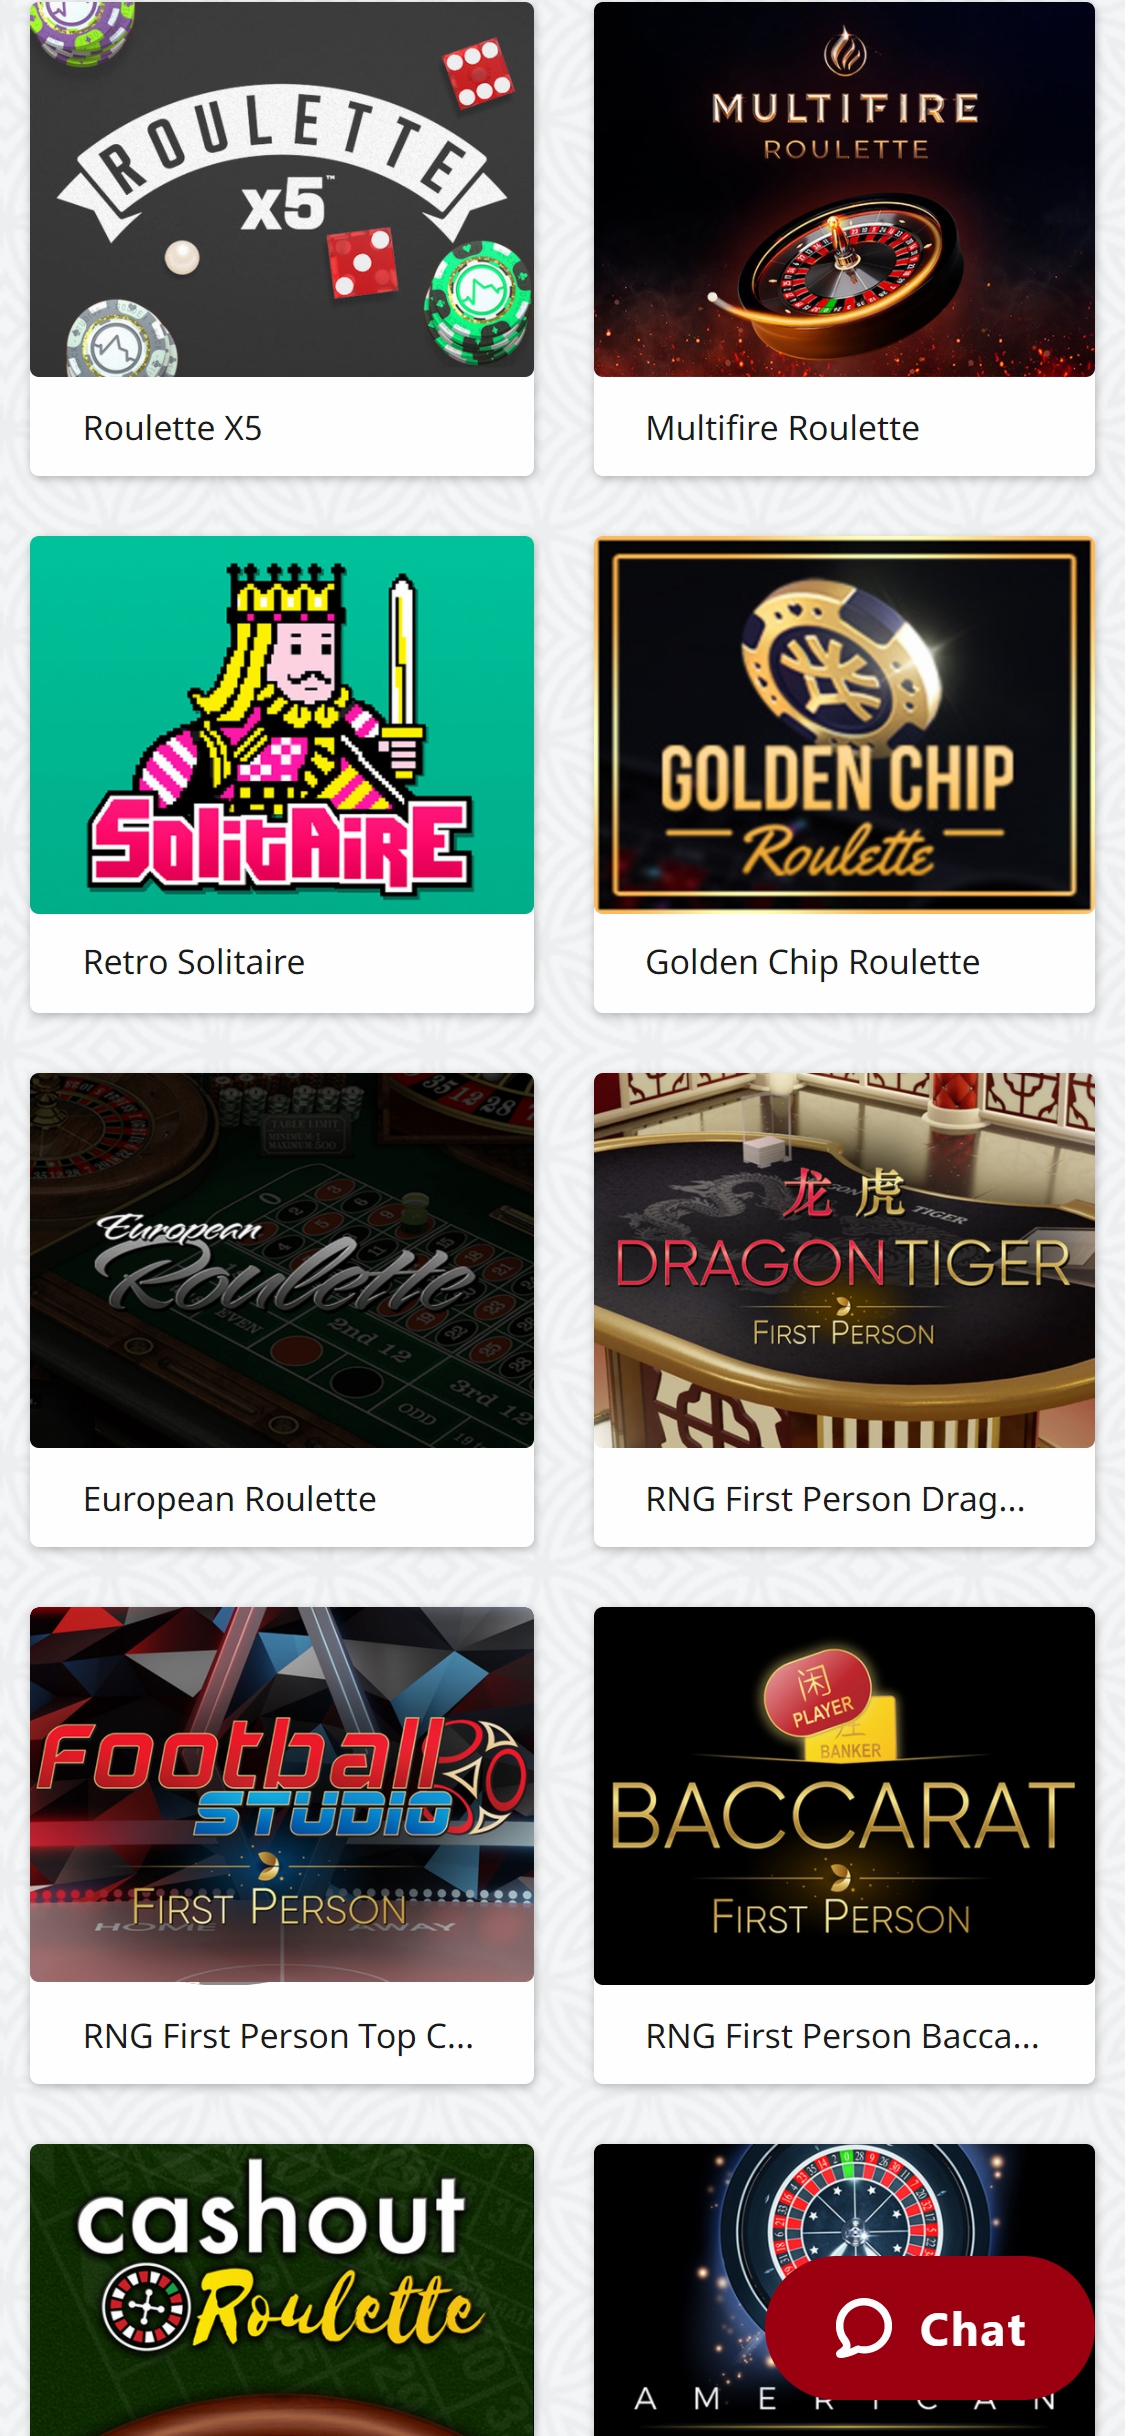 Red Star Bets Casino Mobile Games Review